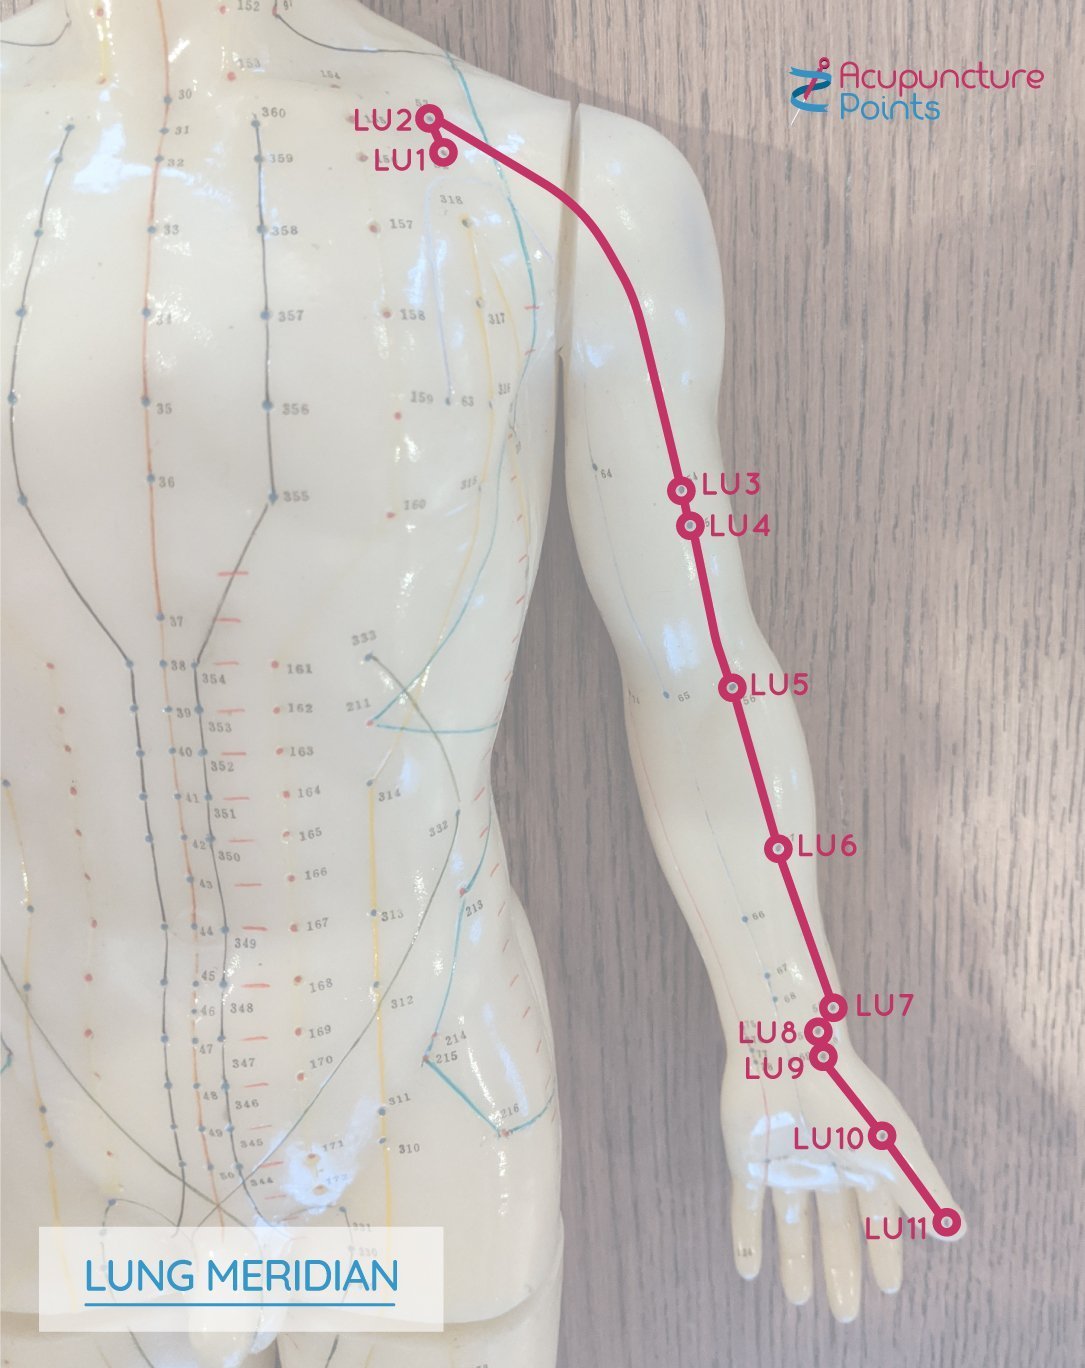 Lung Meridian Points Lung Channel points Acupuncture Points